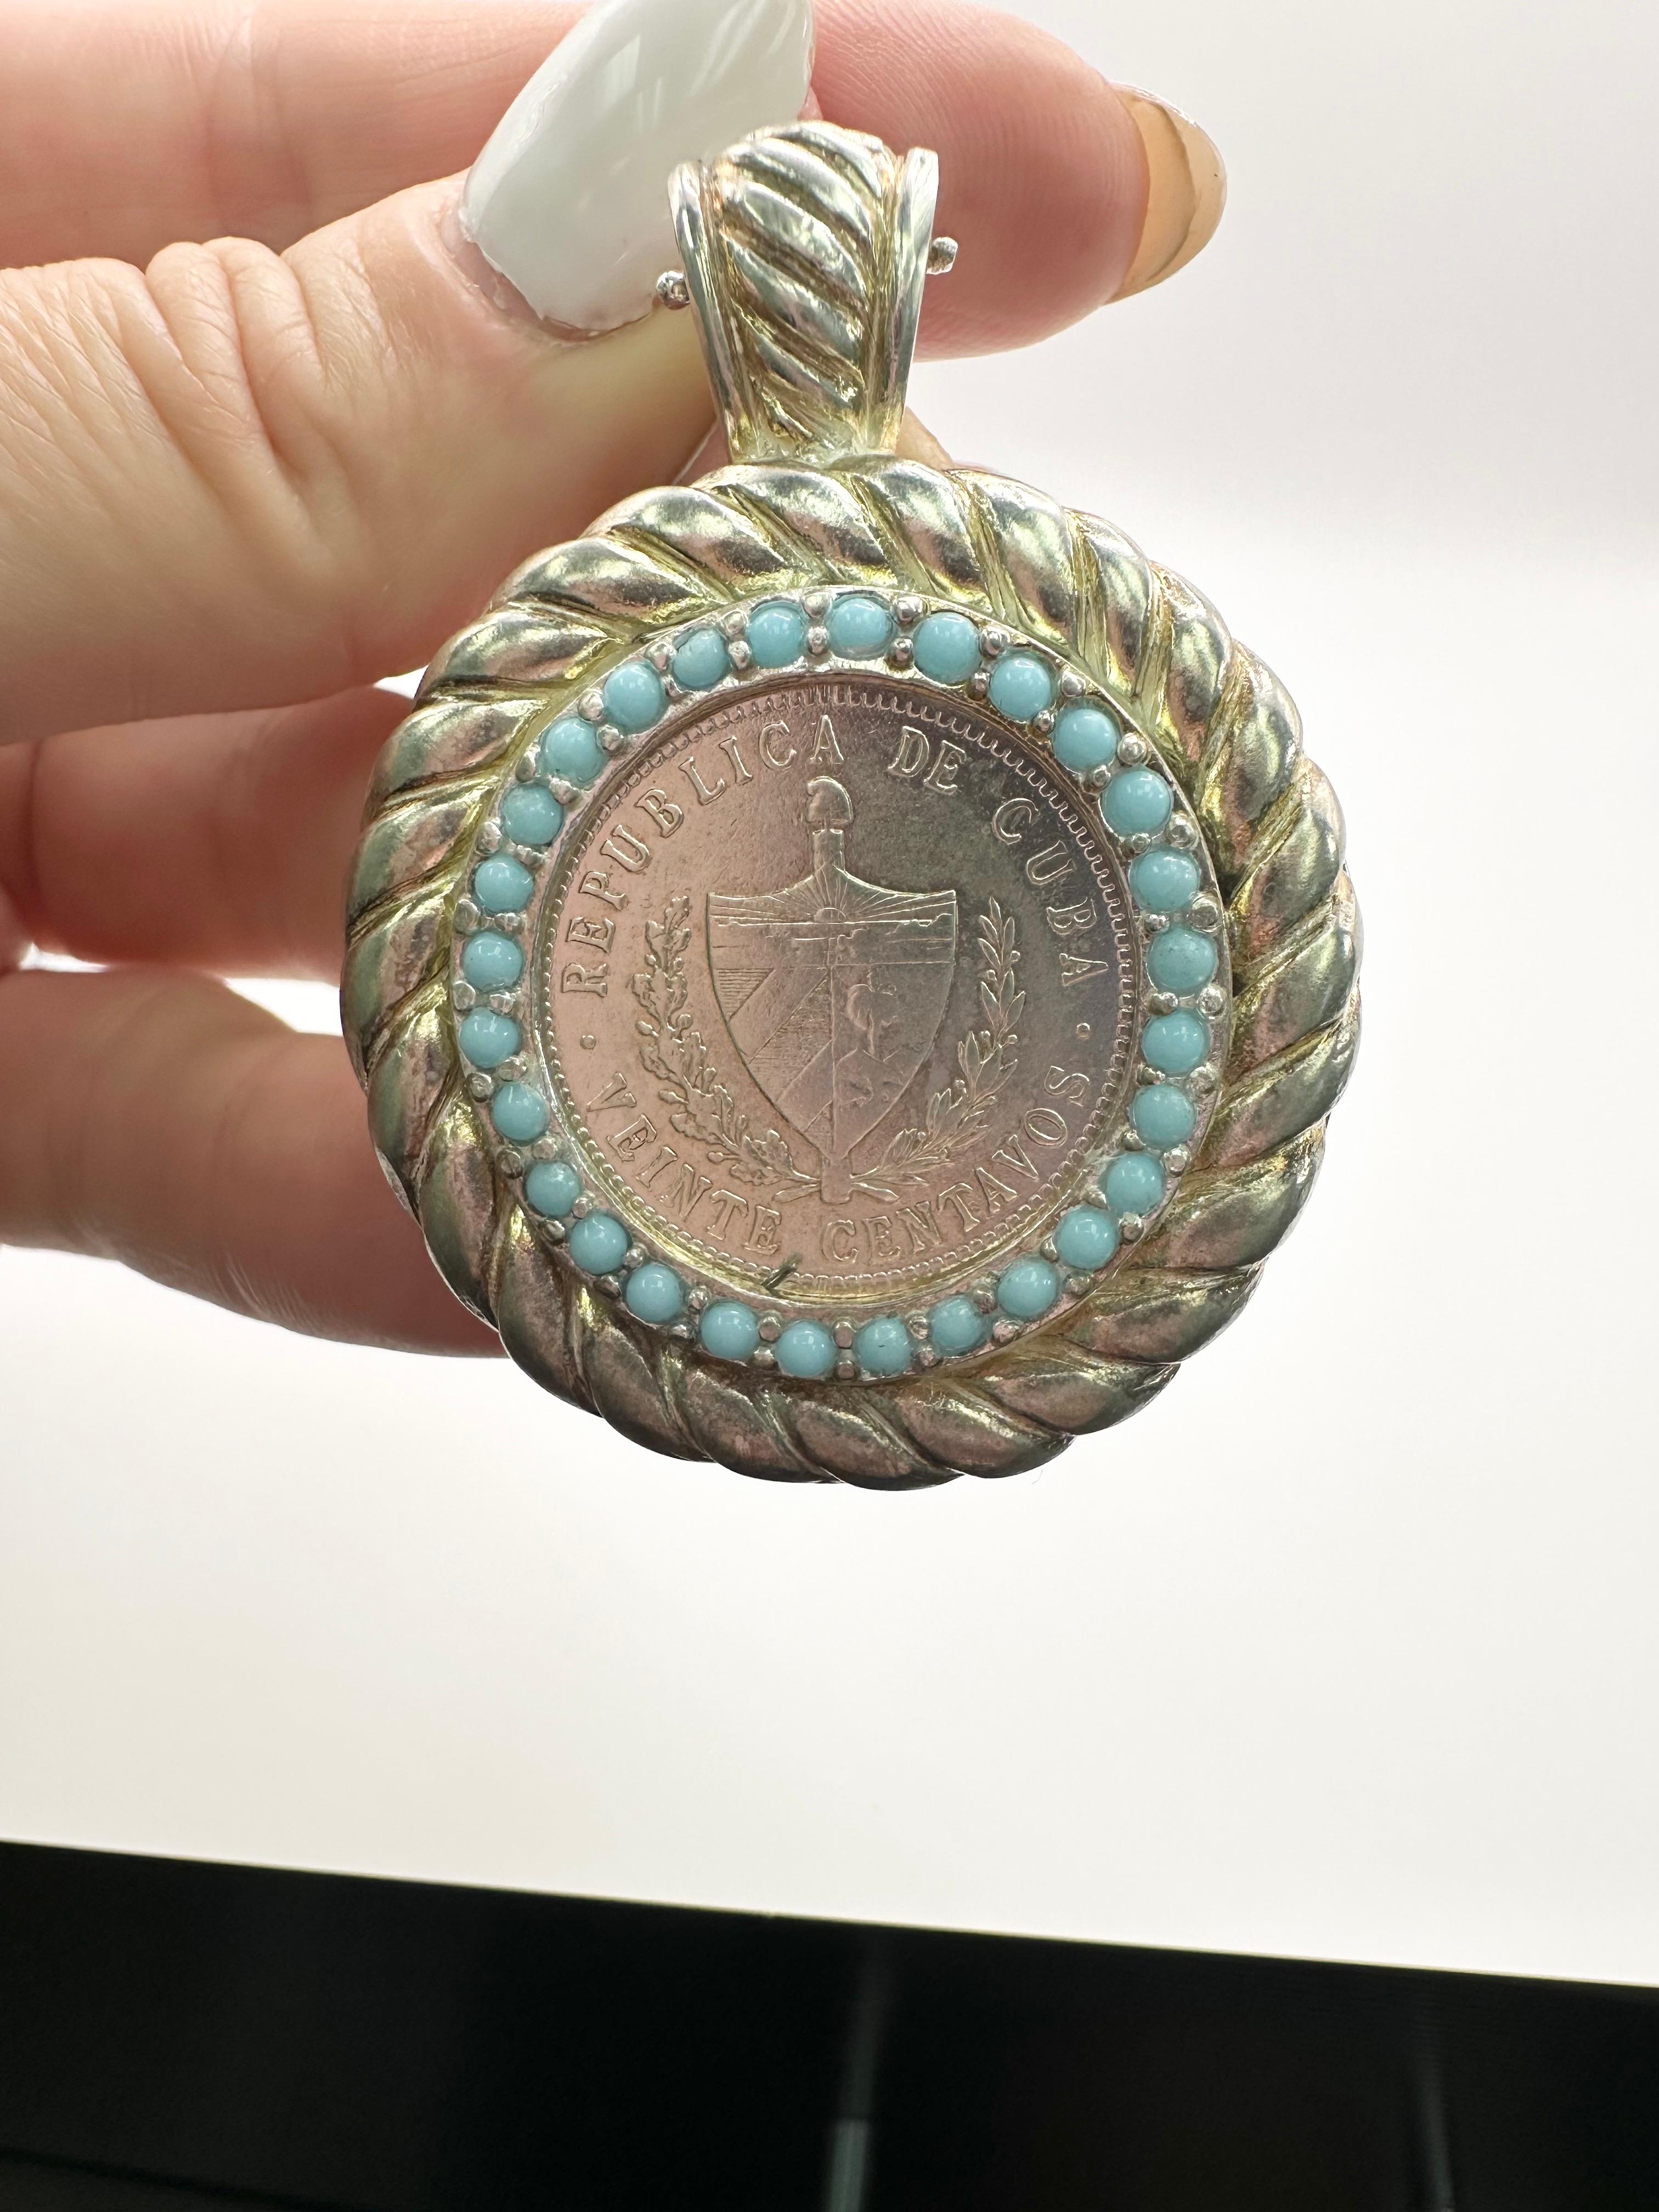 Cuban Coin pendant SS large coin pendant turquoise pendant  In Excellent Condition For Sale In Boca Raton, FL